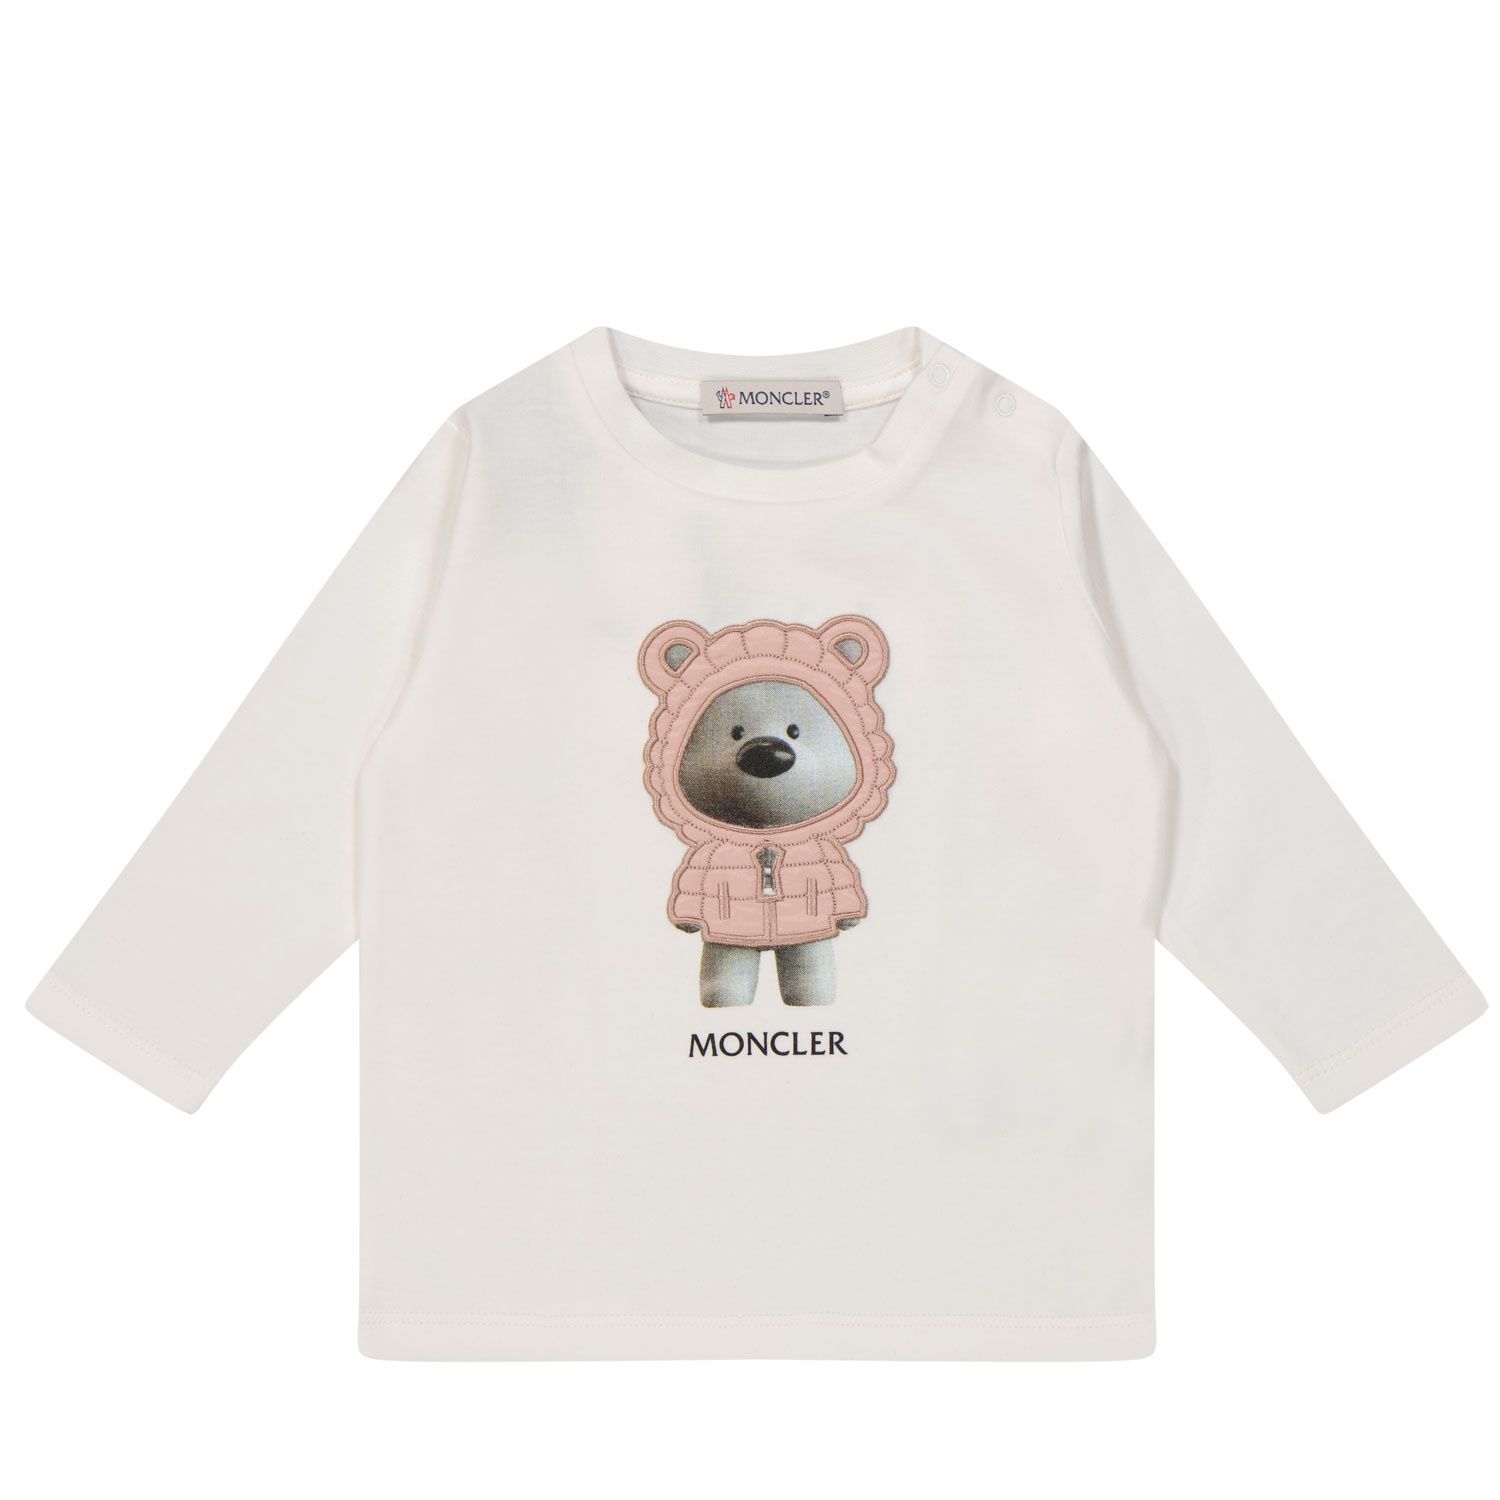 Picture of Moncler 9518D000018392E baby shirt white